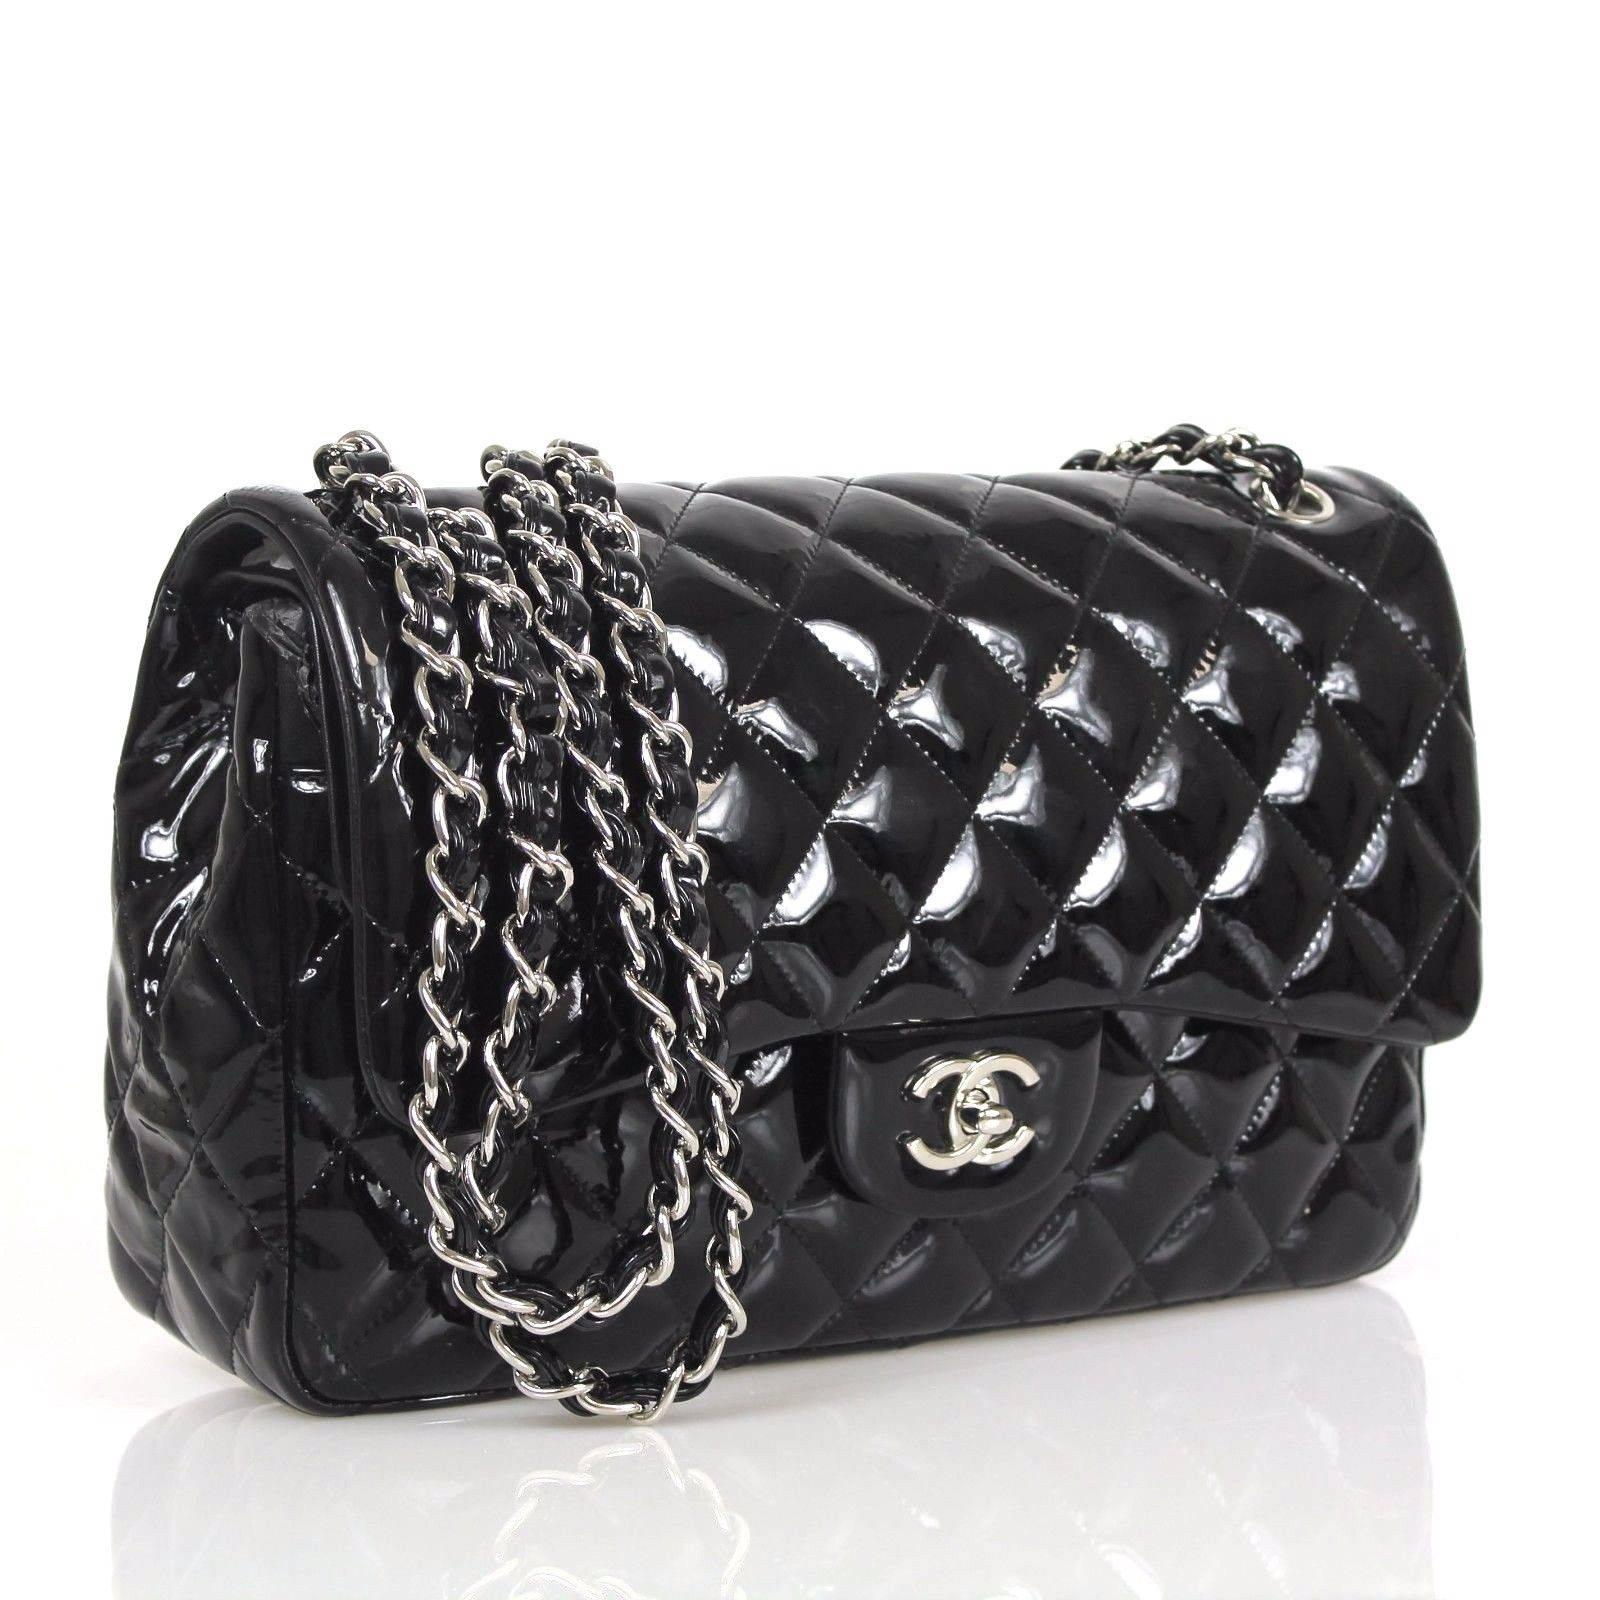 This authentic Chanel Jumbo Classic in black patent leather in great condition. Like all the jumbo classics, this is a double flap style.Durable glorious black patent leather is quilted in signature Chanel diamond stitched pattern. Complimentary